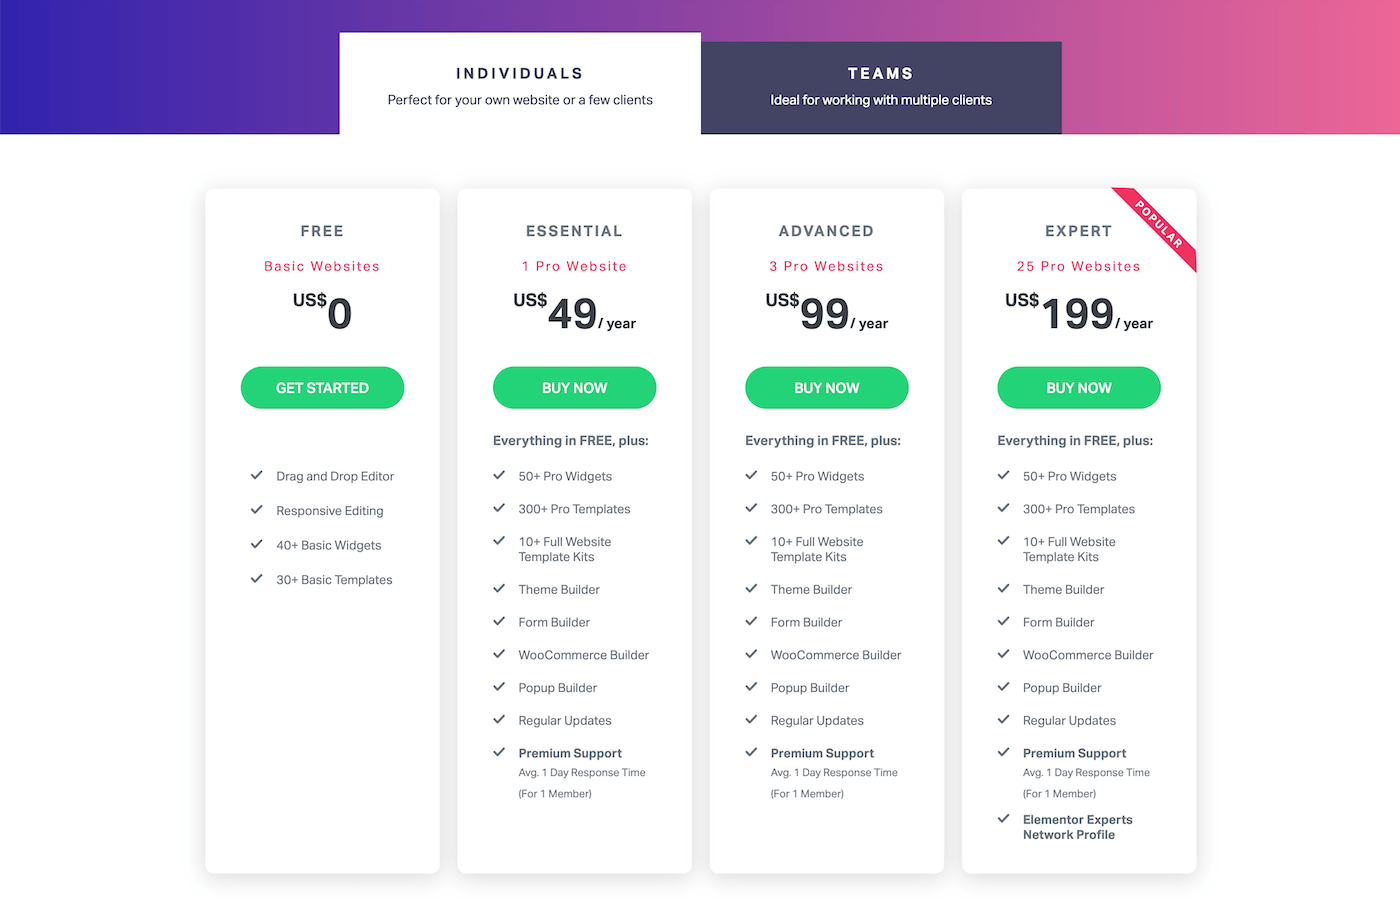 Elementor pricing for individuals